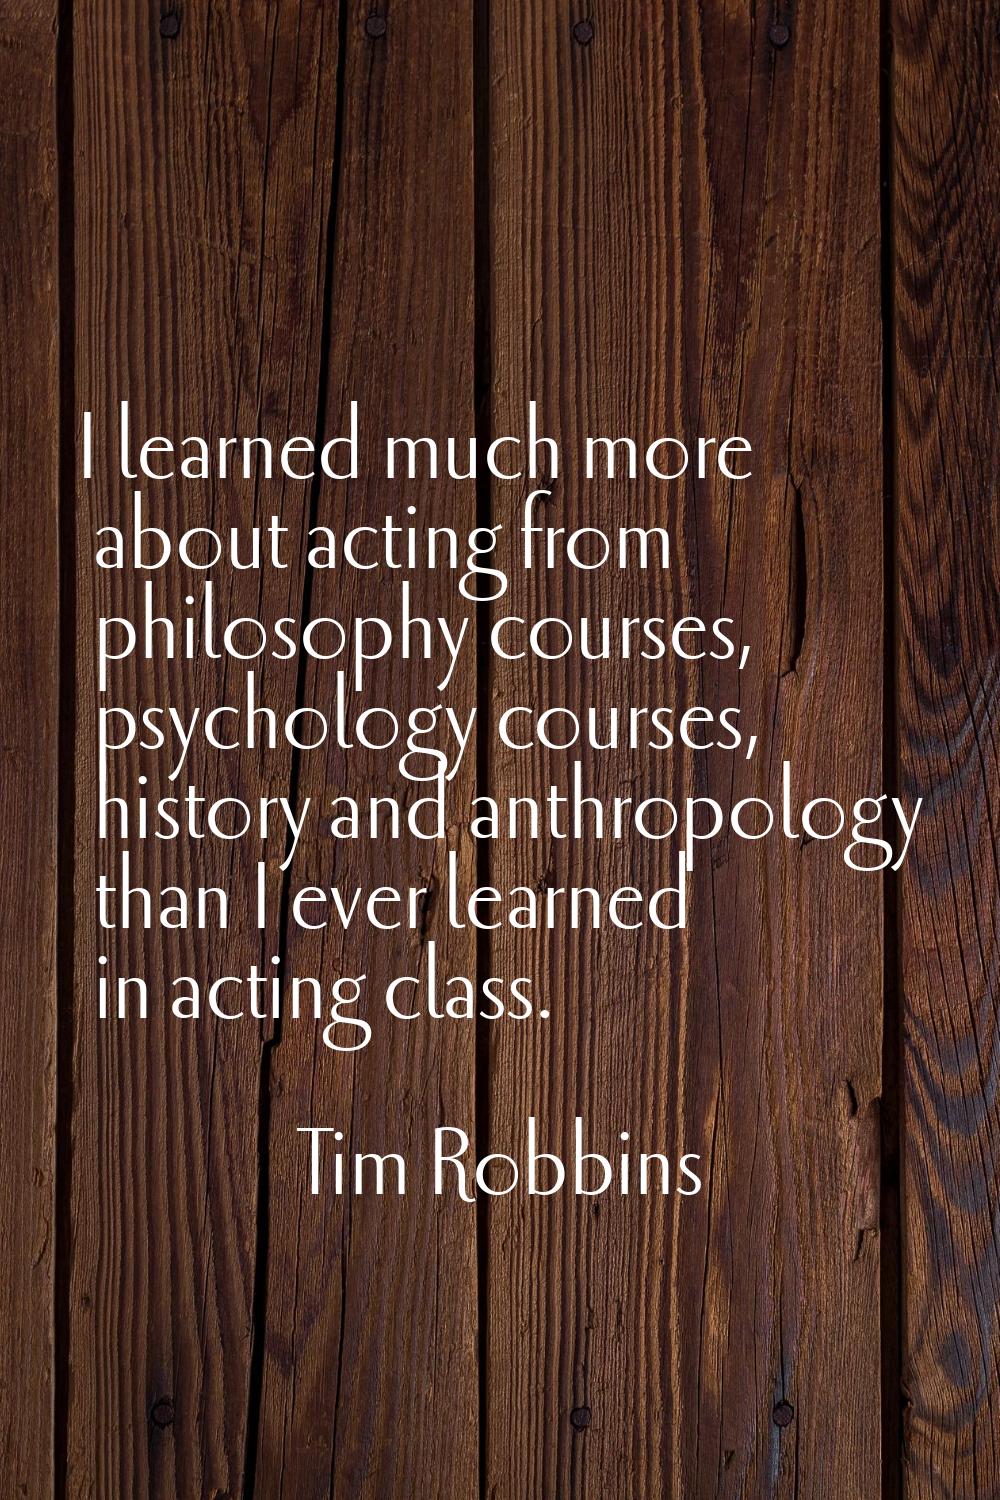 I learned much more about acting from philosophy courses, psychology courses, history and anthropol